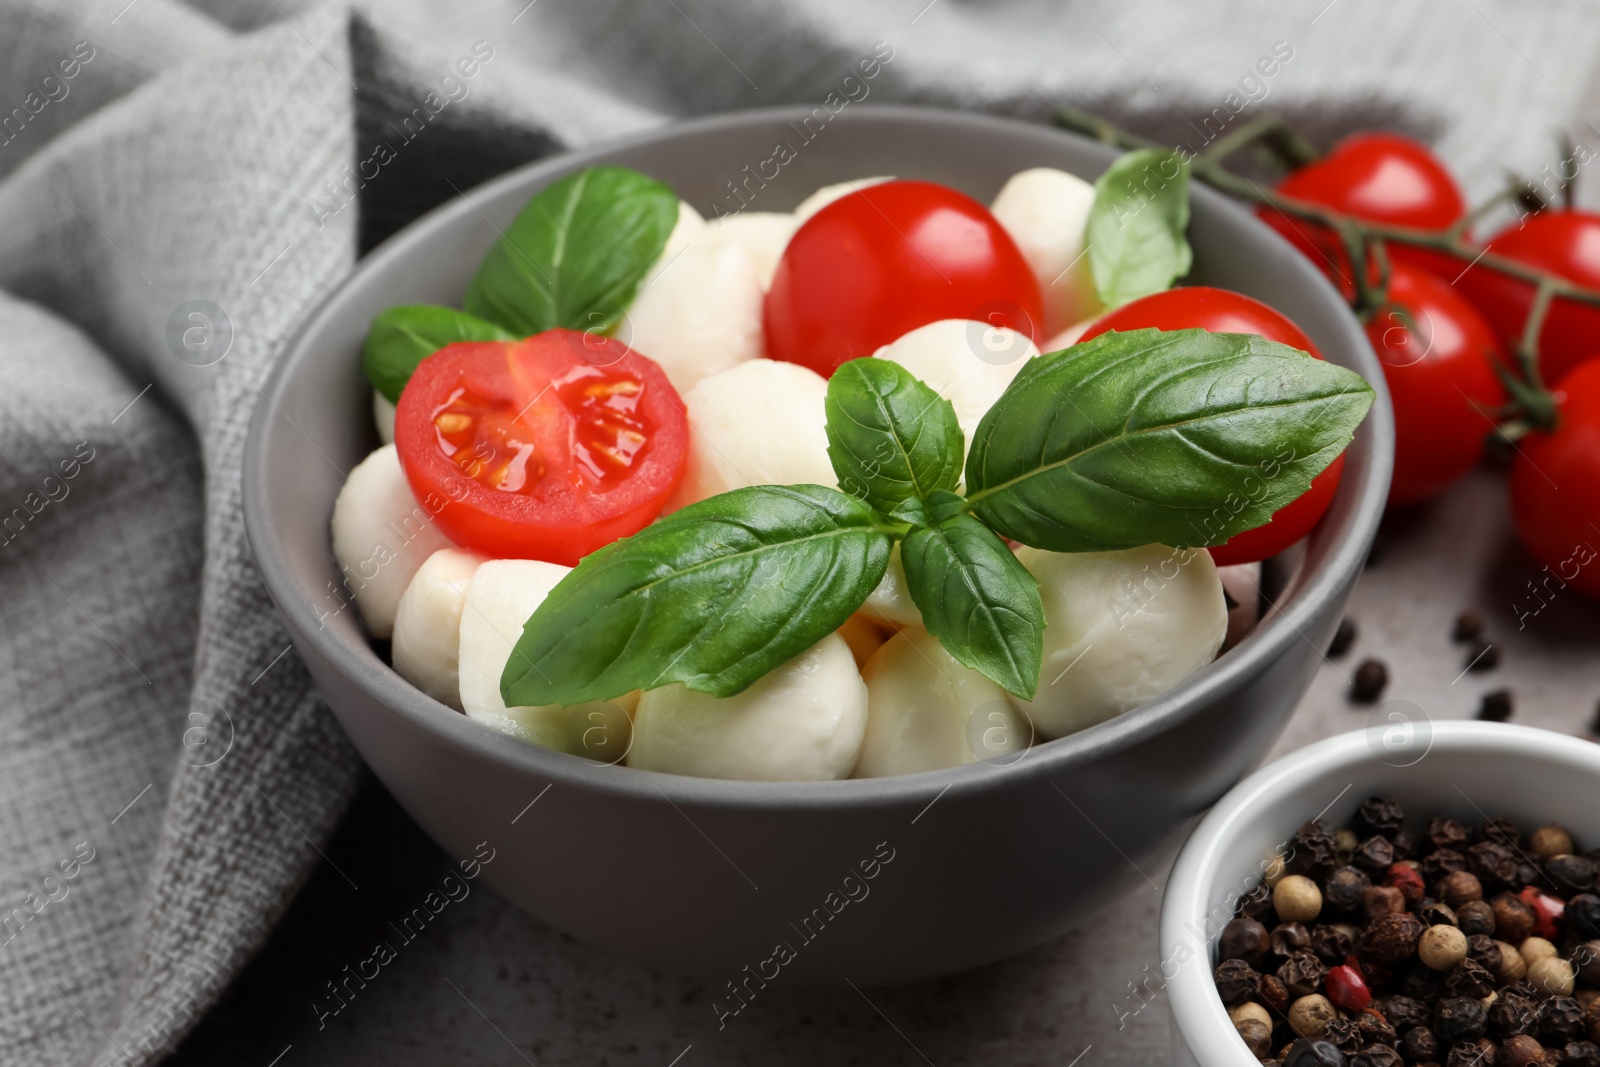 Photo of Delicious mozzarella balls in bowl, tomatoes and basil leaves on table, closeup